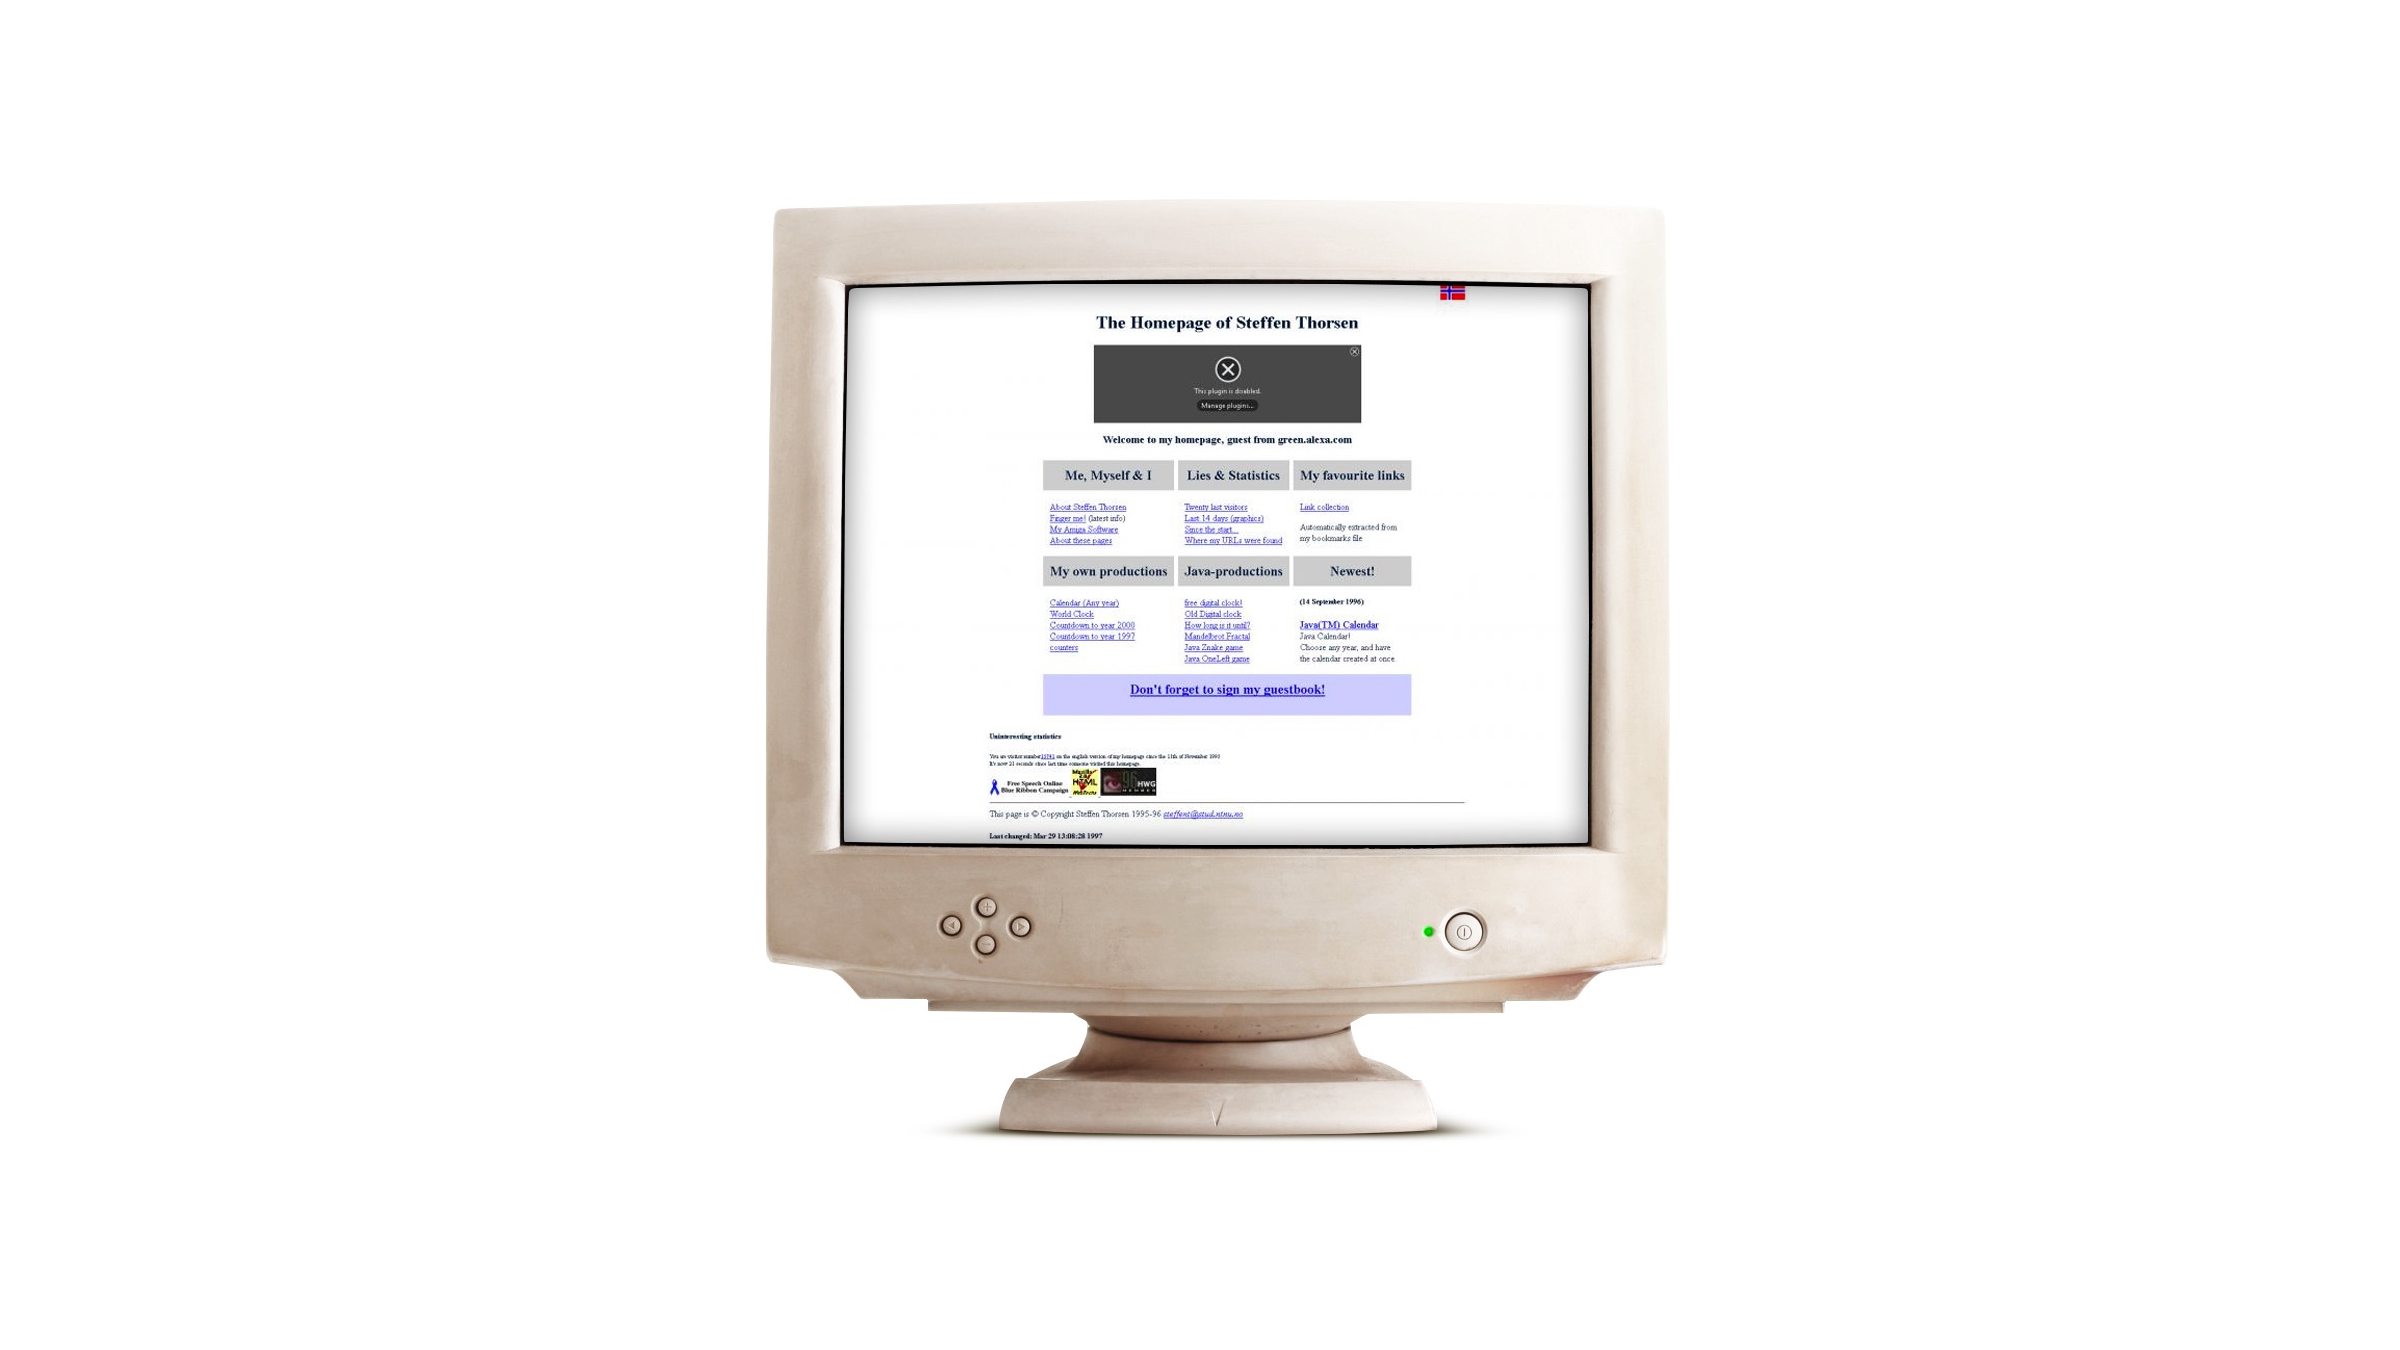 Steffen Thorsen's old homepage displayed on an old monitor